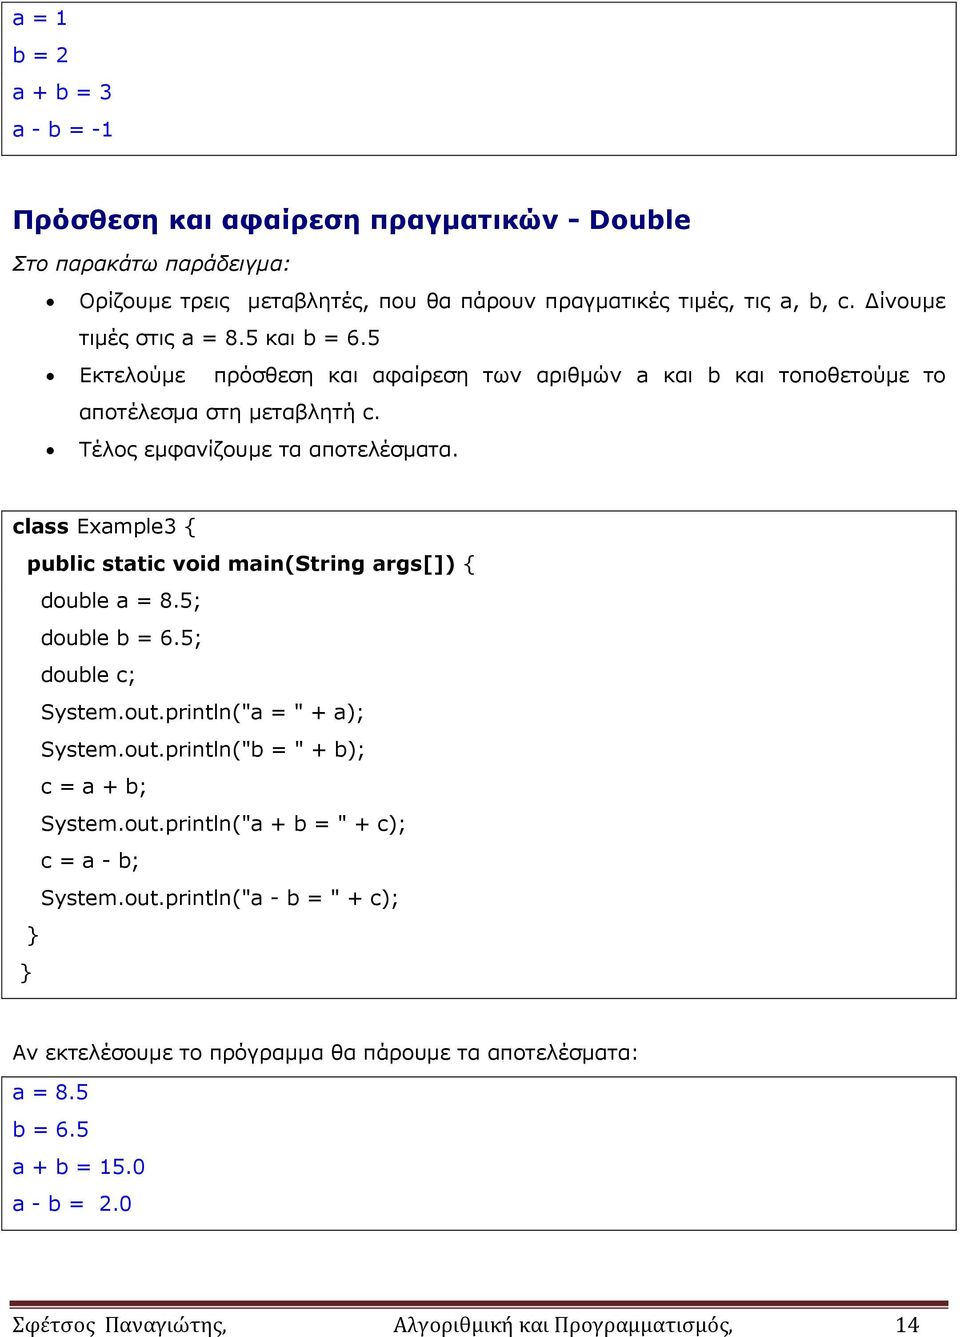 class Example3 { public static void main(string args[]) { double a = 8.5; double b = 6.5; double c; System.out.println("a = " + a); System.out.println("b = " + b); c = a + b; System.out.println("a + b = " + c); c = a - b; System.